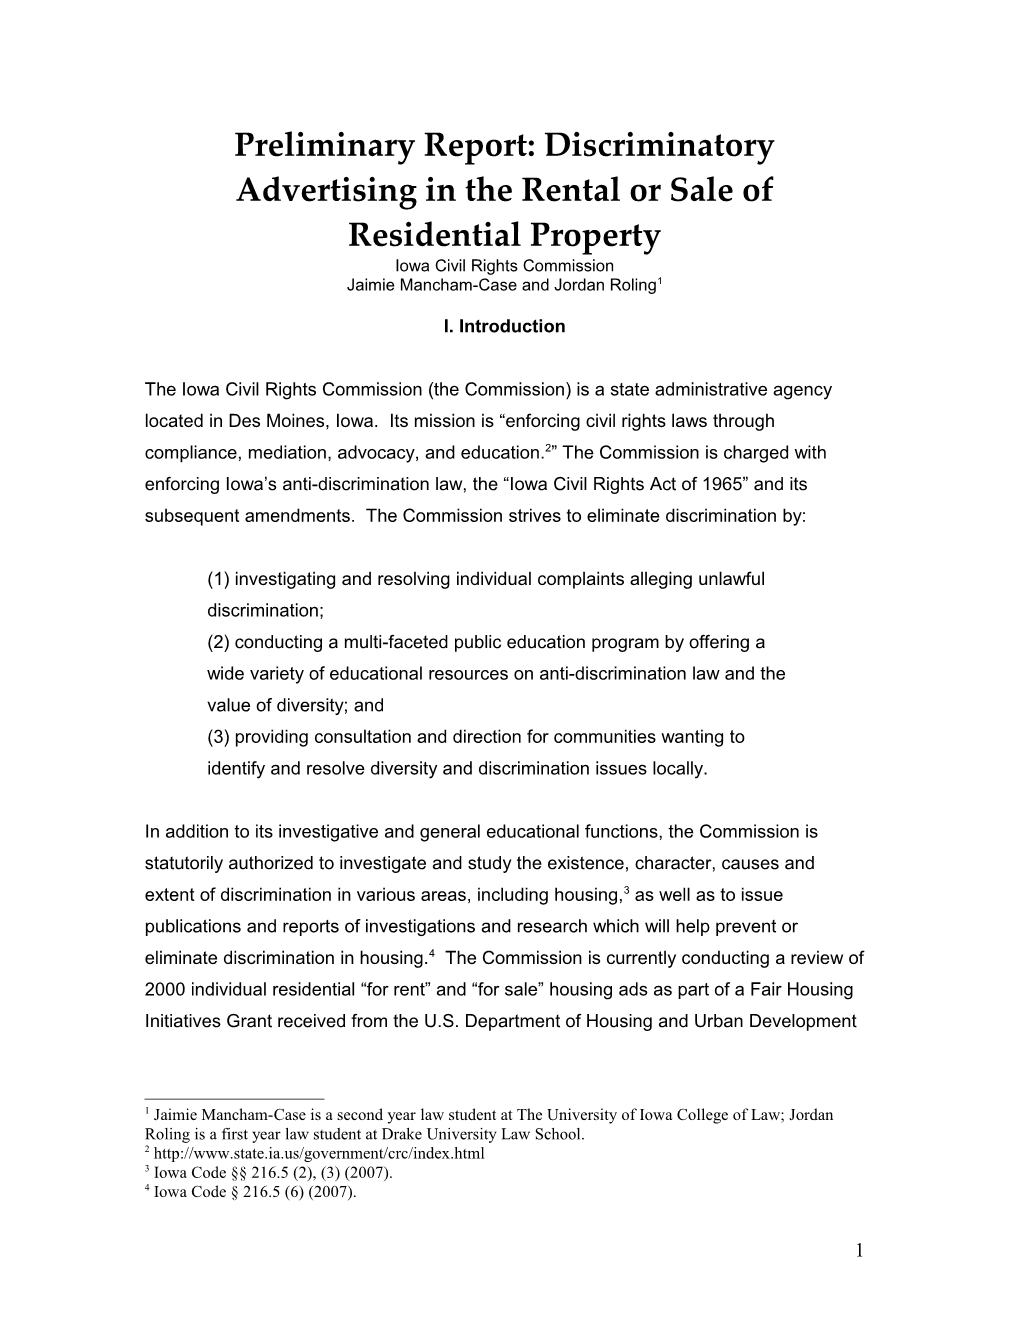 Preliminary Report: Discriminatory Advertising in the Rental Or Sale of Residential Property